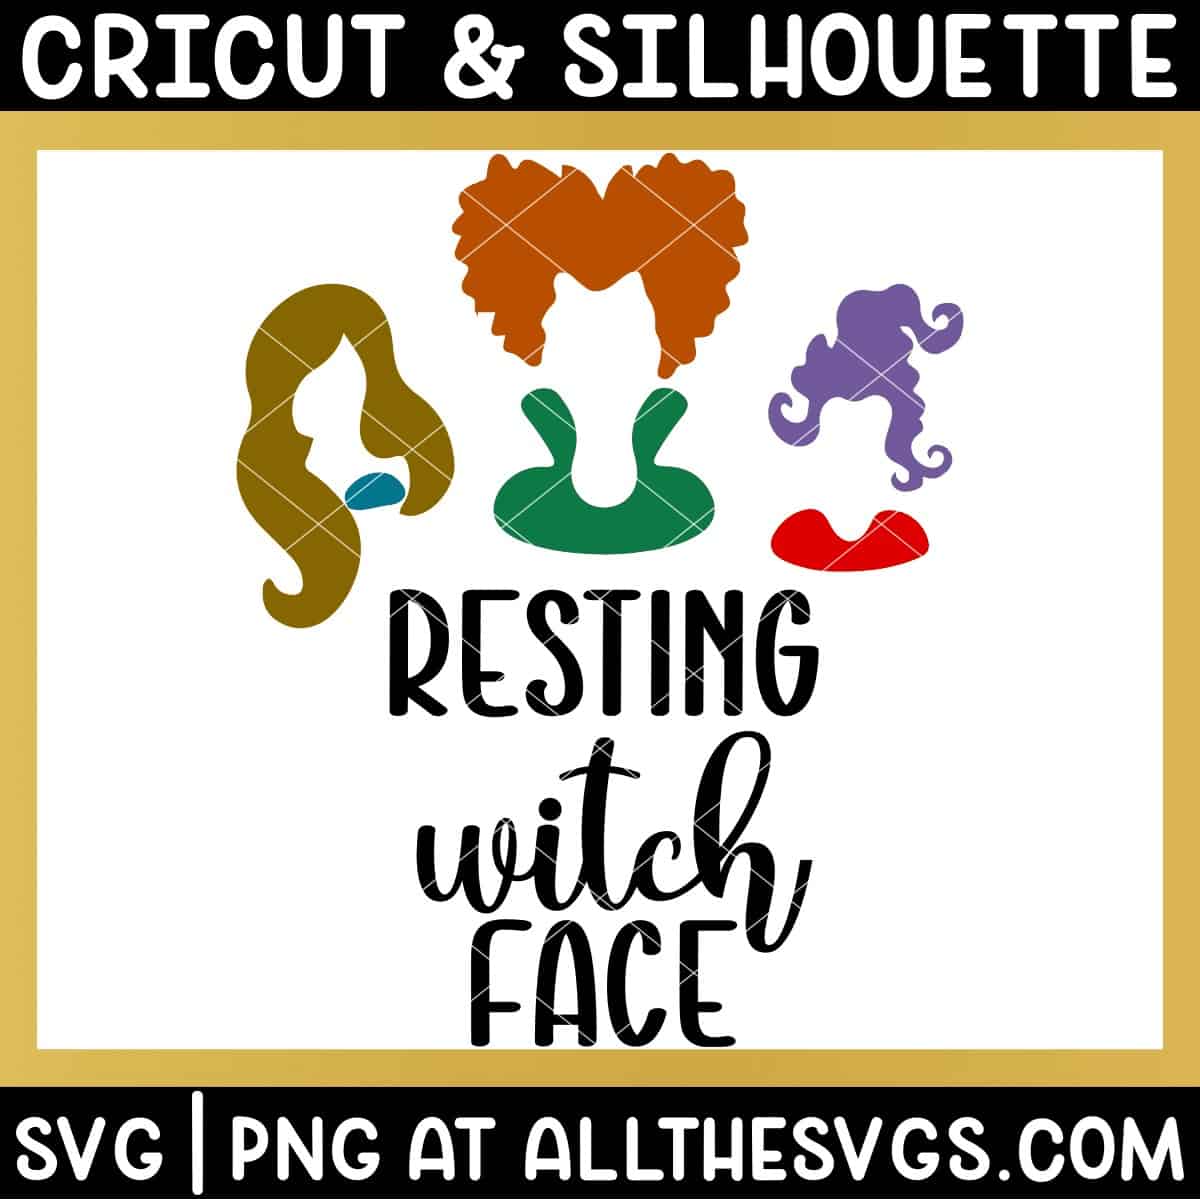 resting witch face svg file with sanderson sisters.